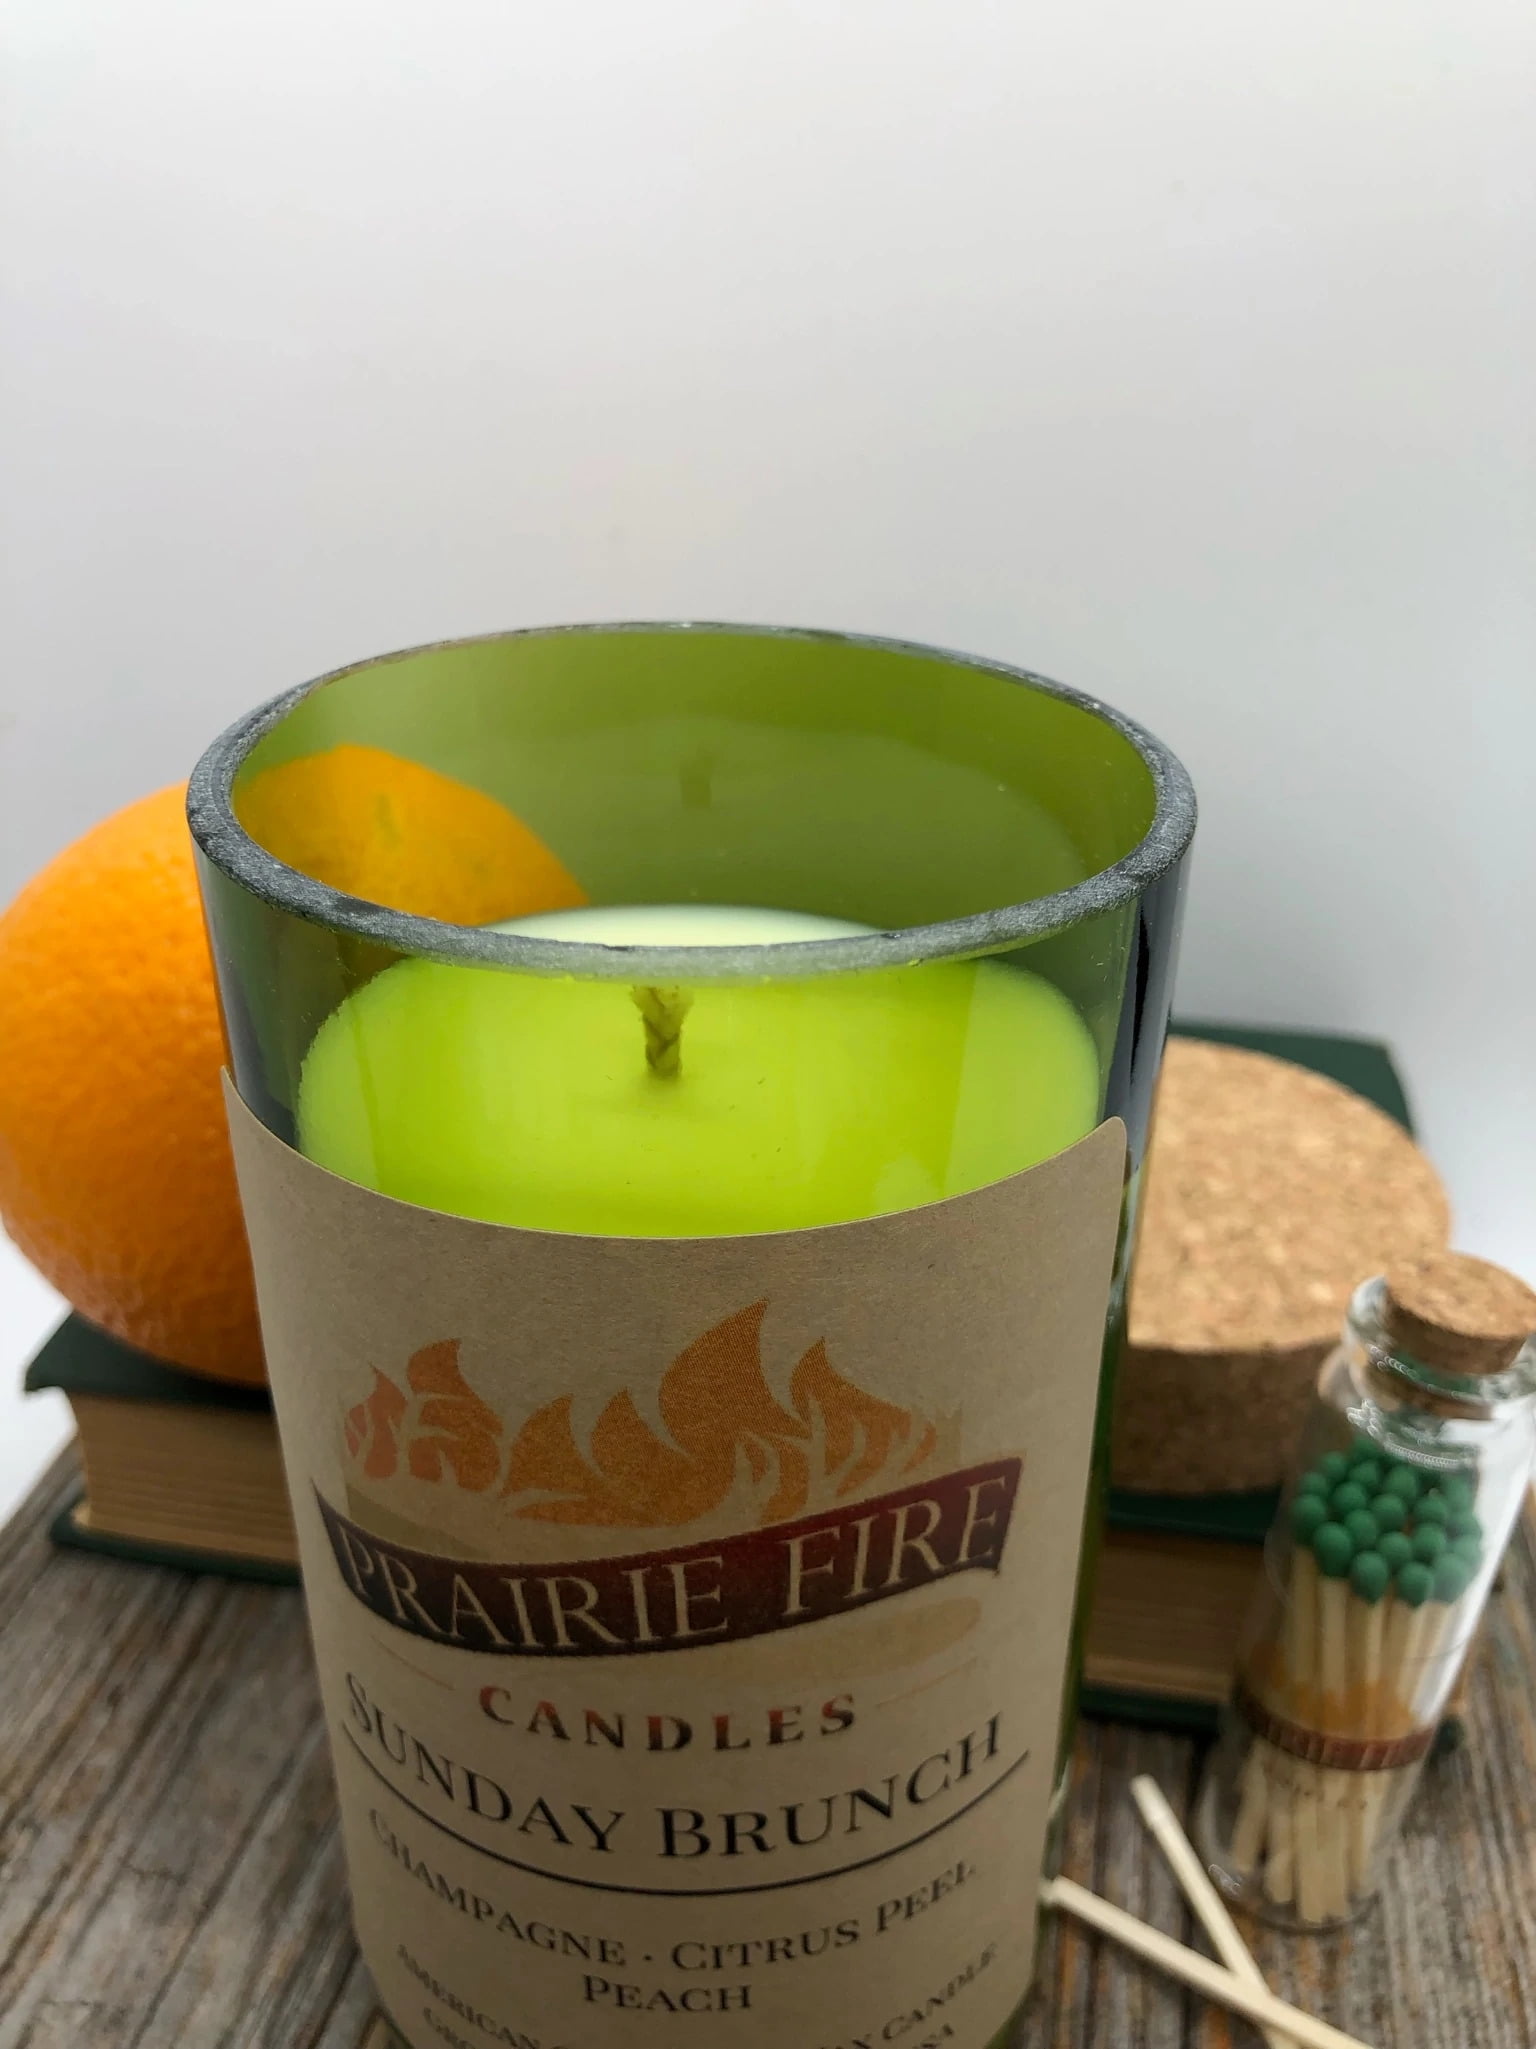 Peach Scented Soy Teakight Candles Handmade in the USA. 